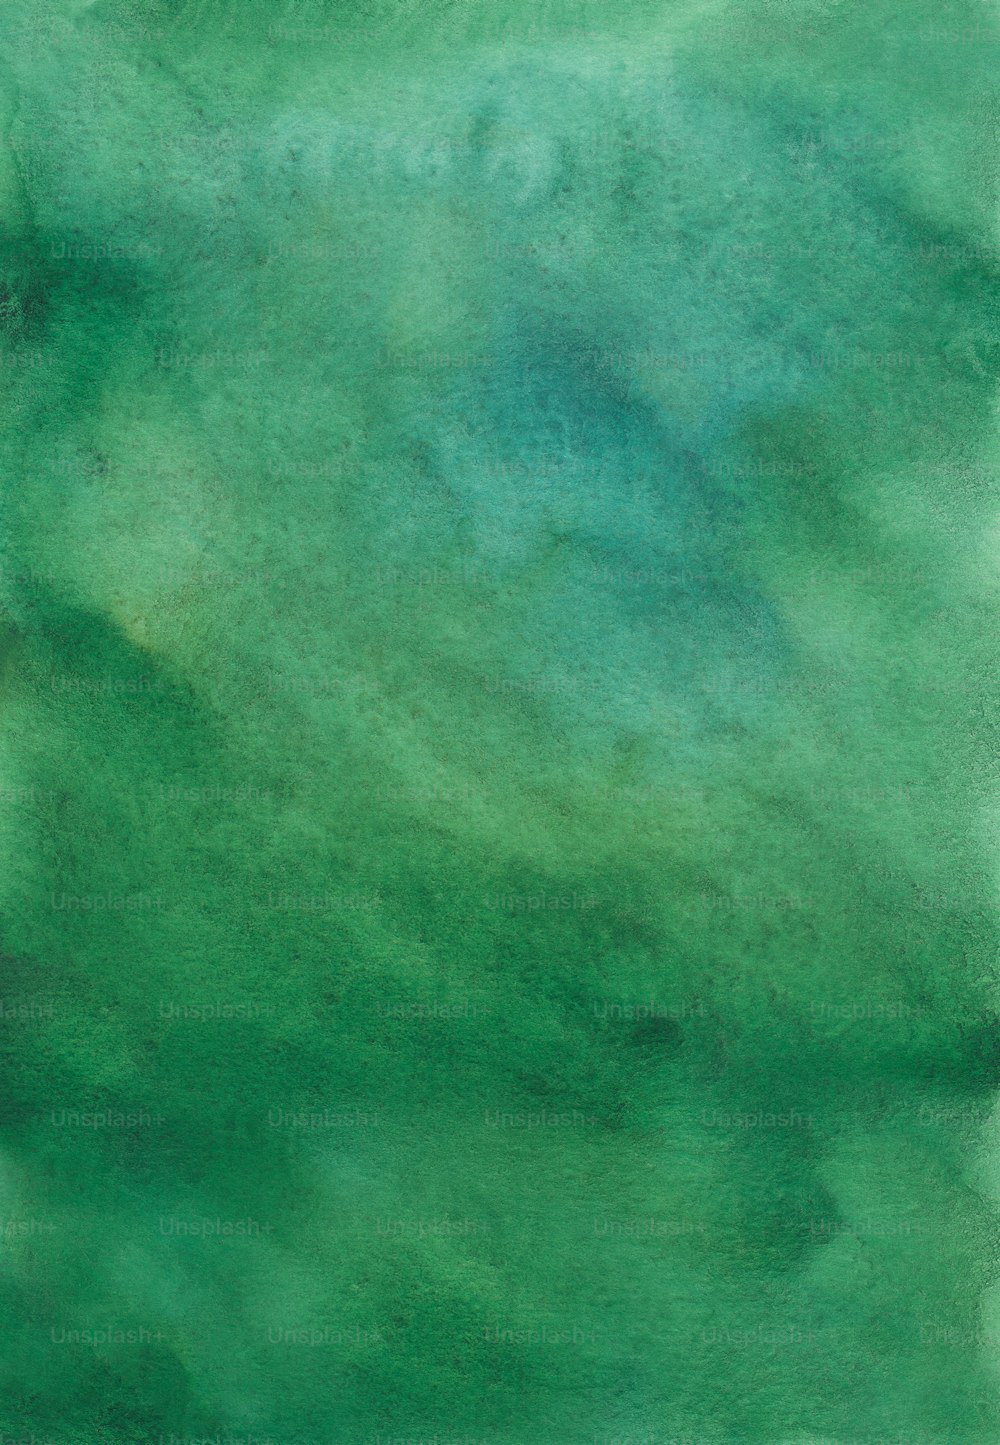 a painting of a green and blue sky